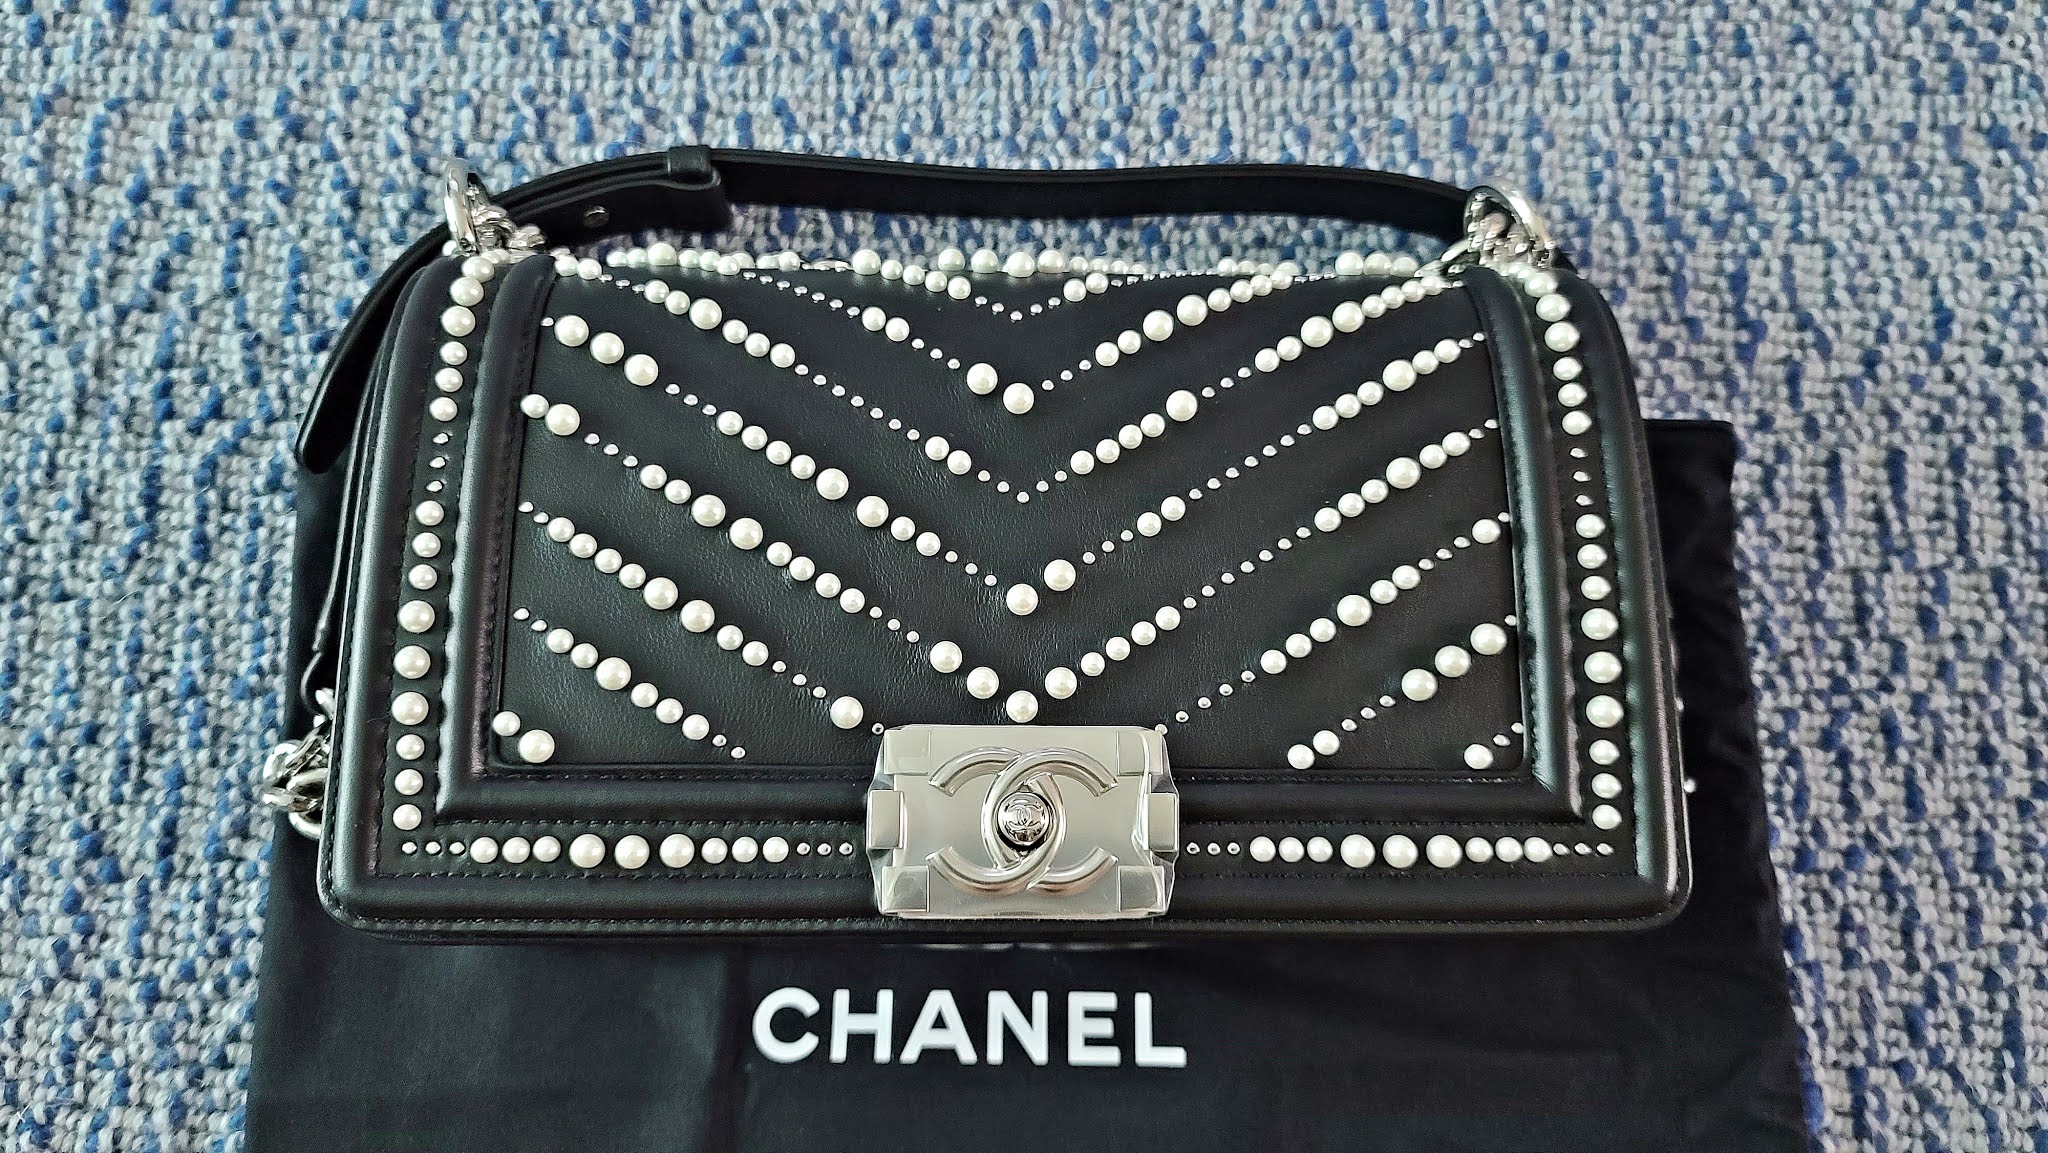 unboxing my chanel precision bag!!!!!!! #chanel #unboxing #chanelbag